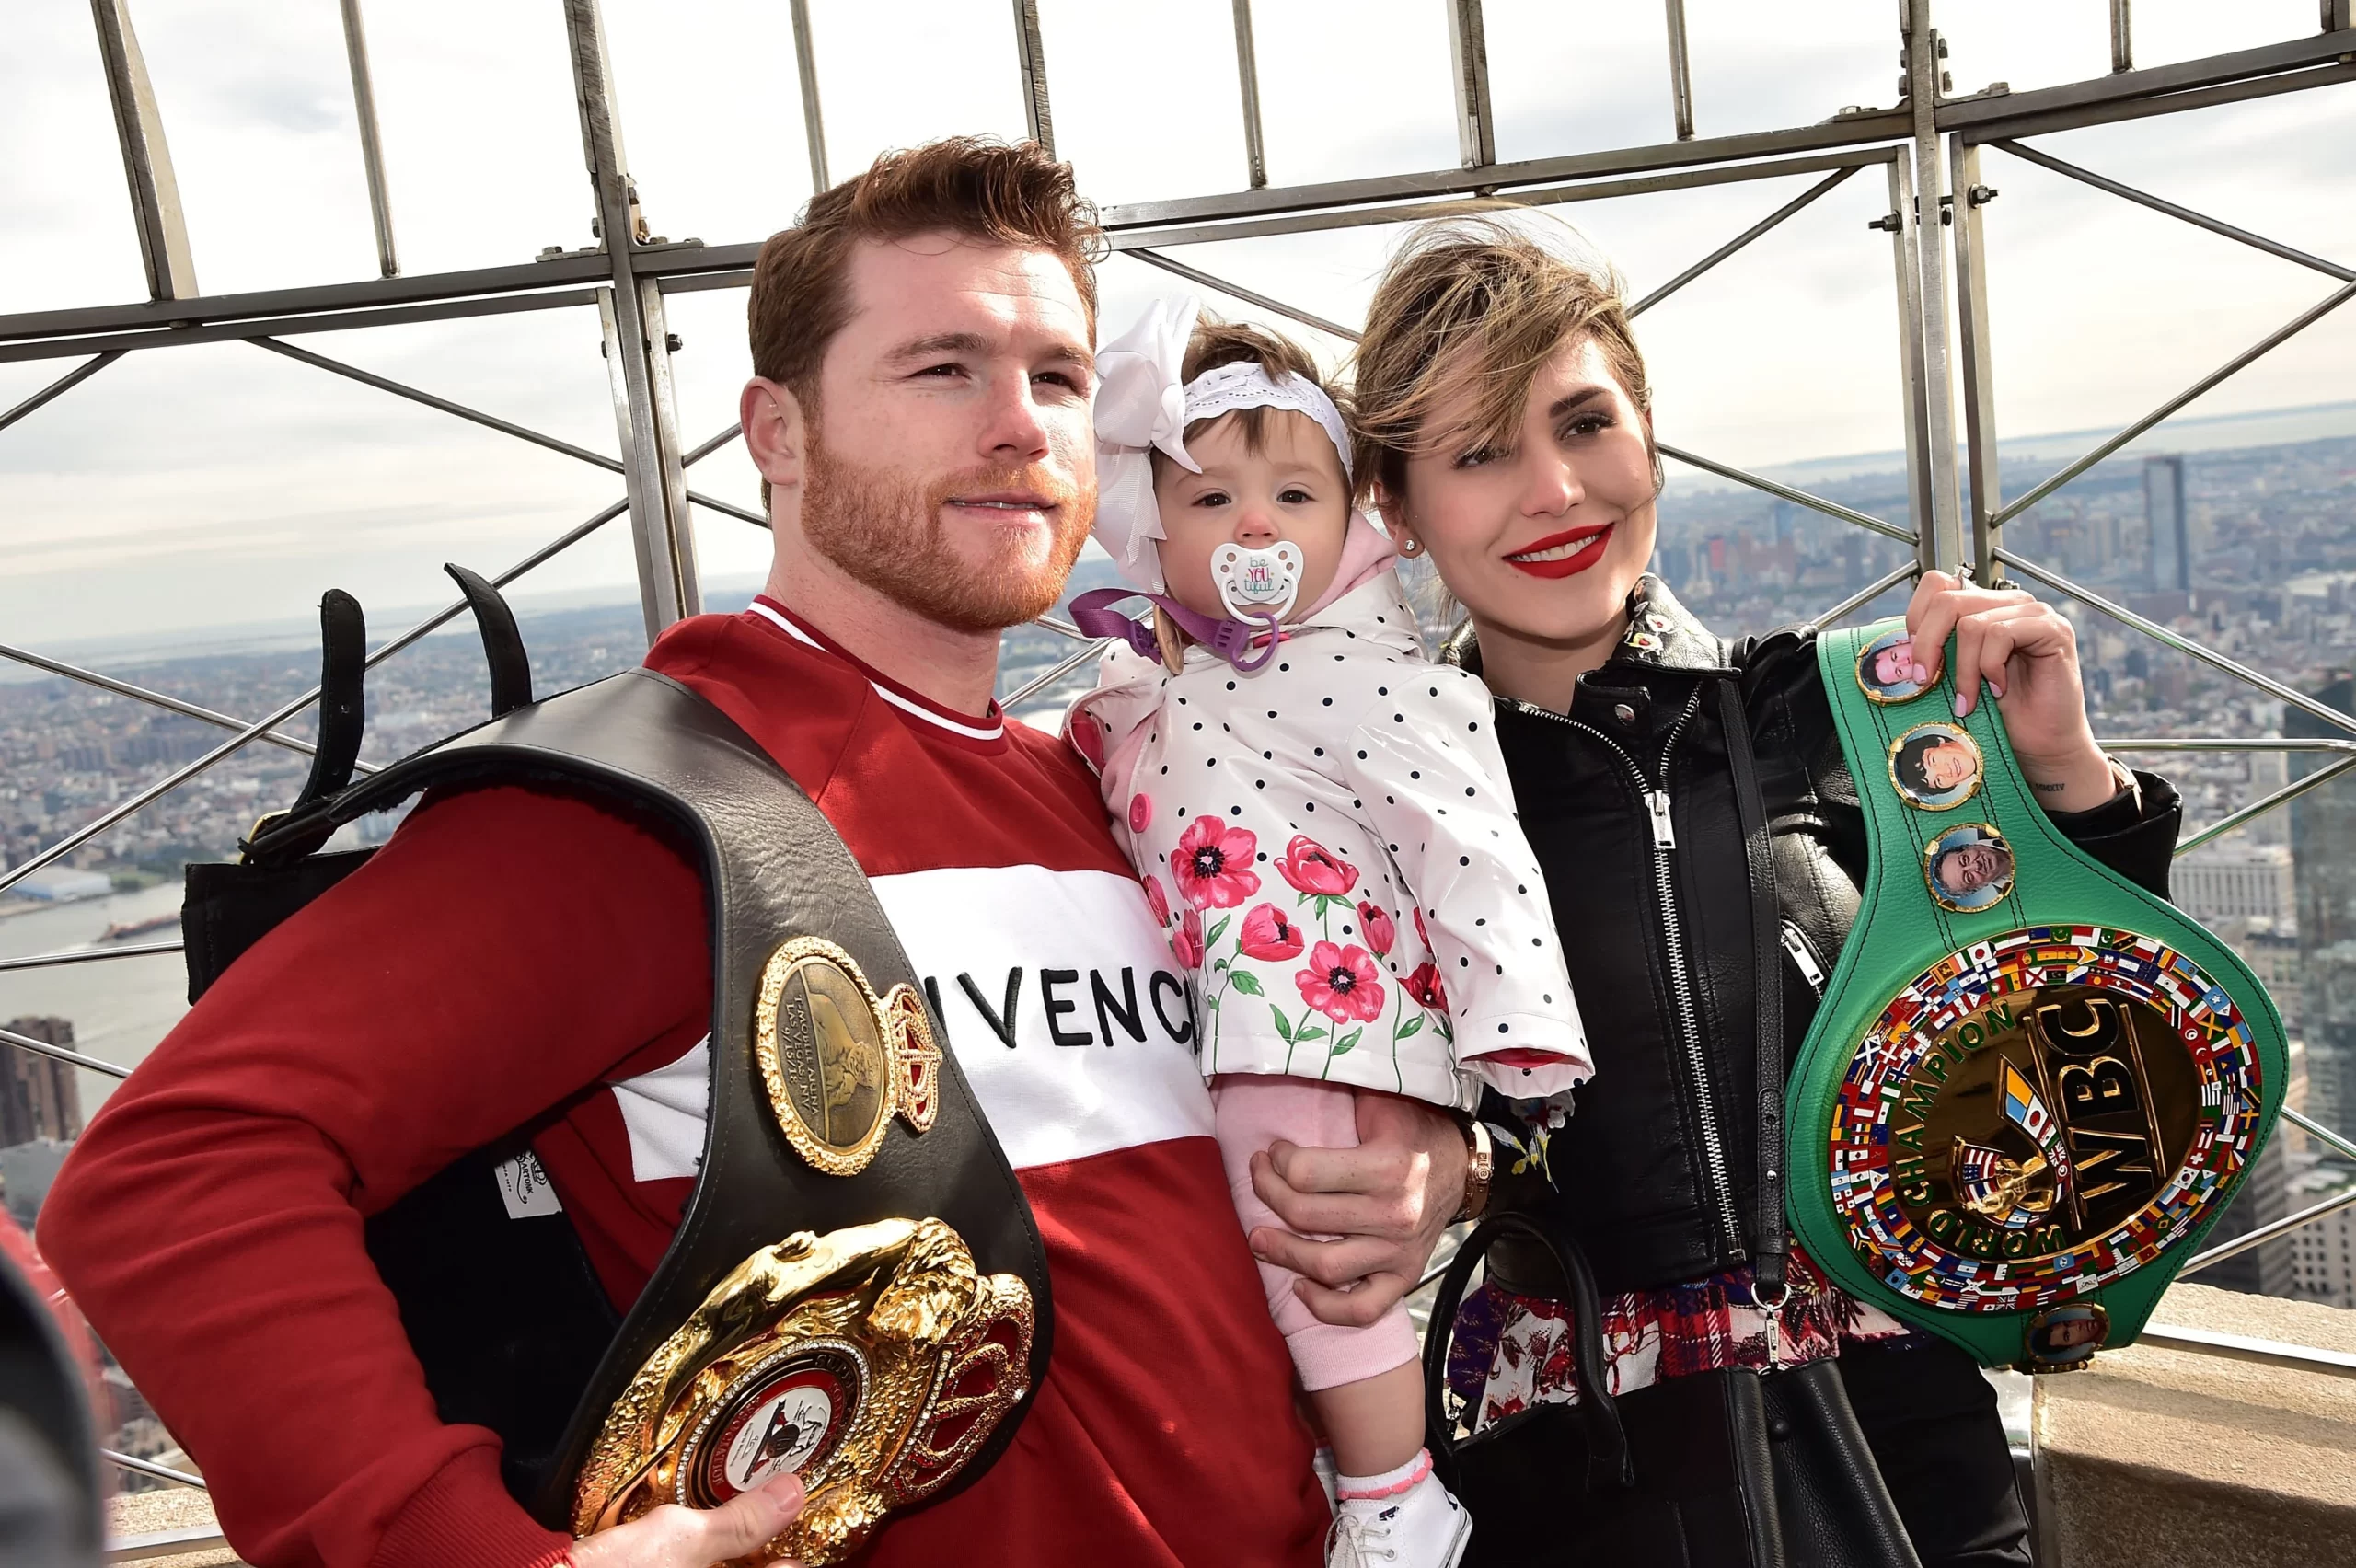 Canelo With His Wife, Fernanda, And Daughter, Maria